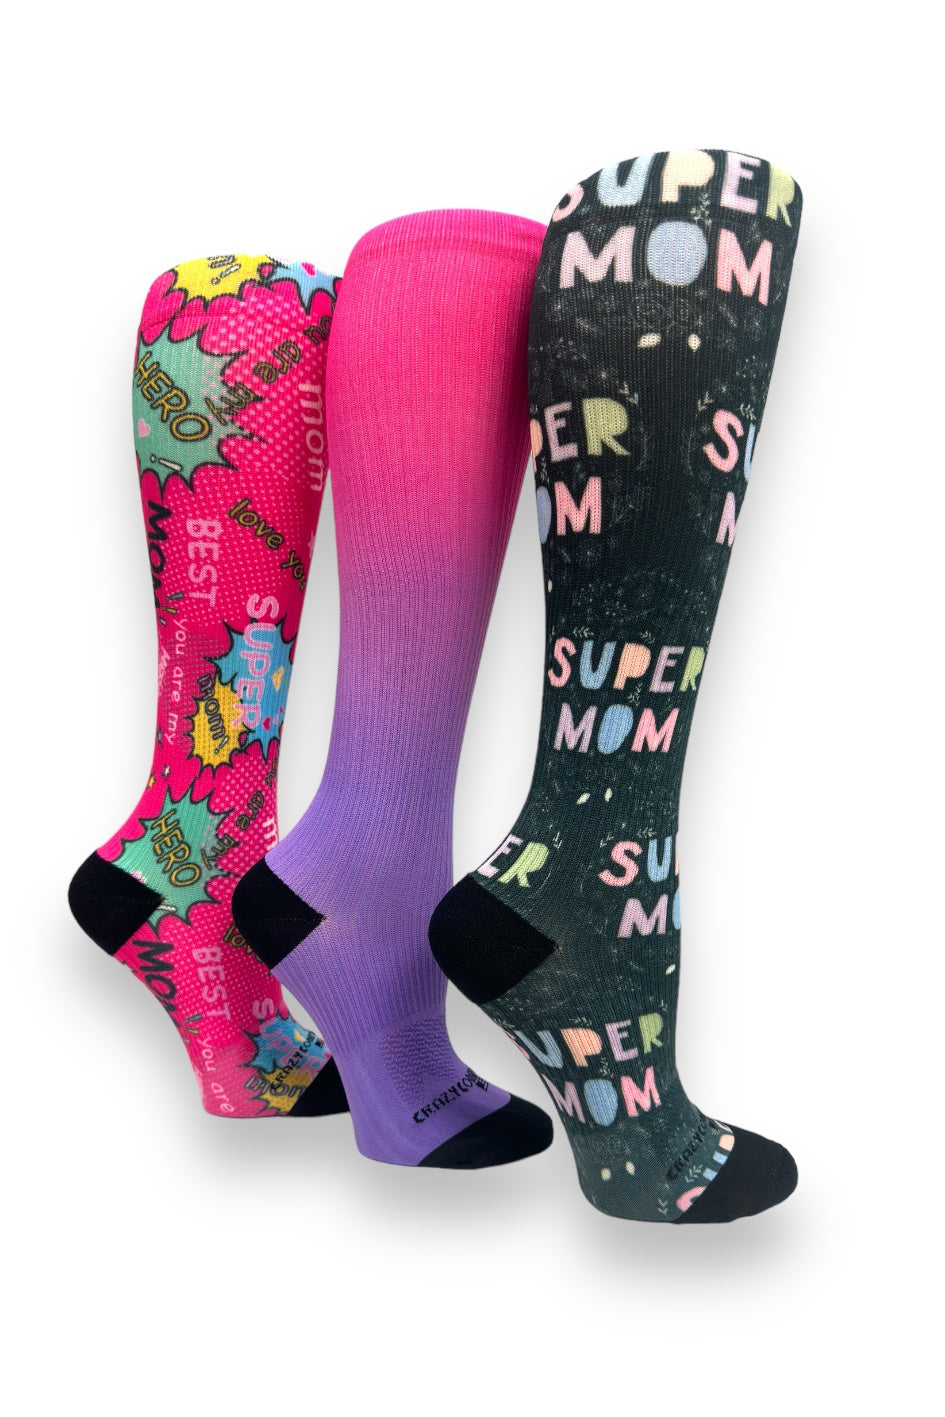 3 Pair Pack - Super Mom (Standard & Extra Wide)